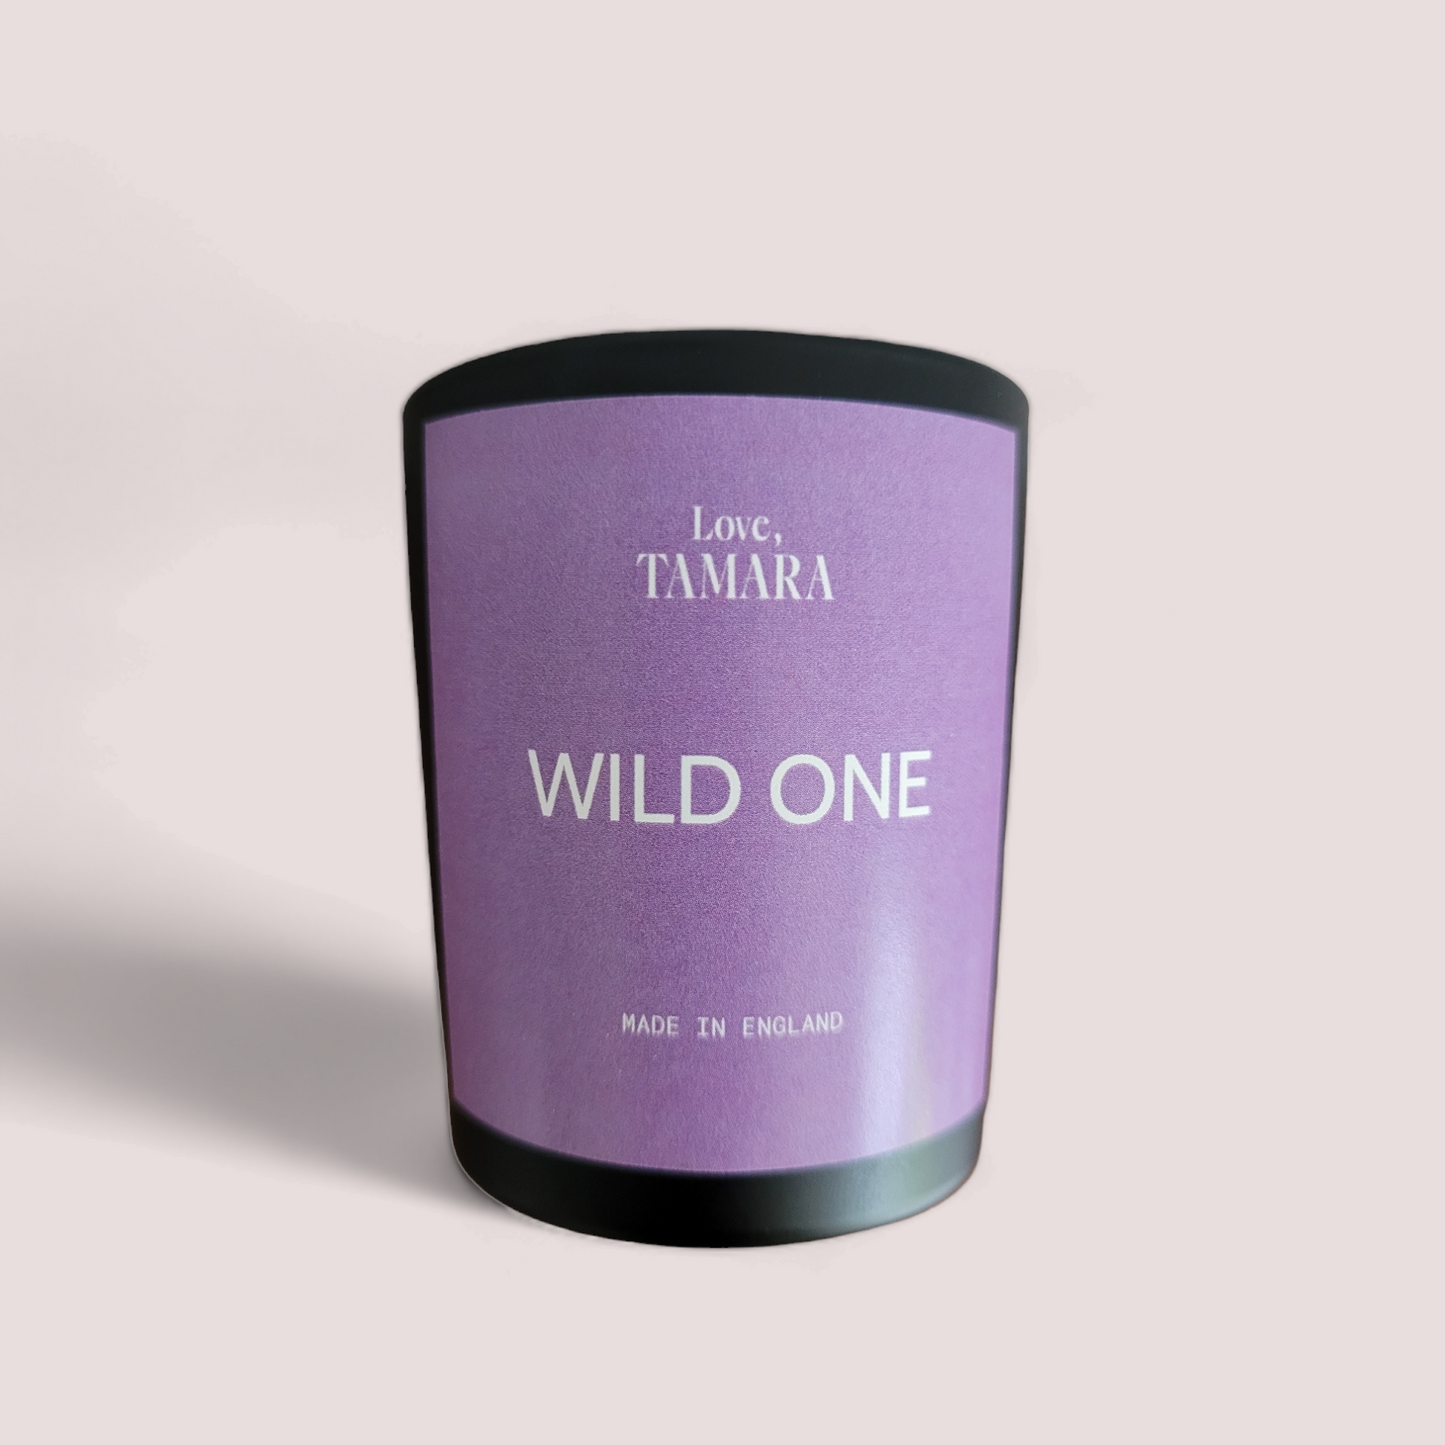 The Wild One Scented Candle